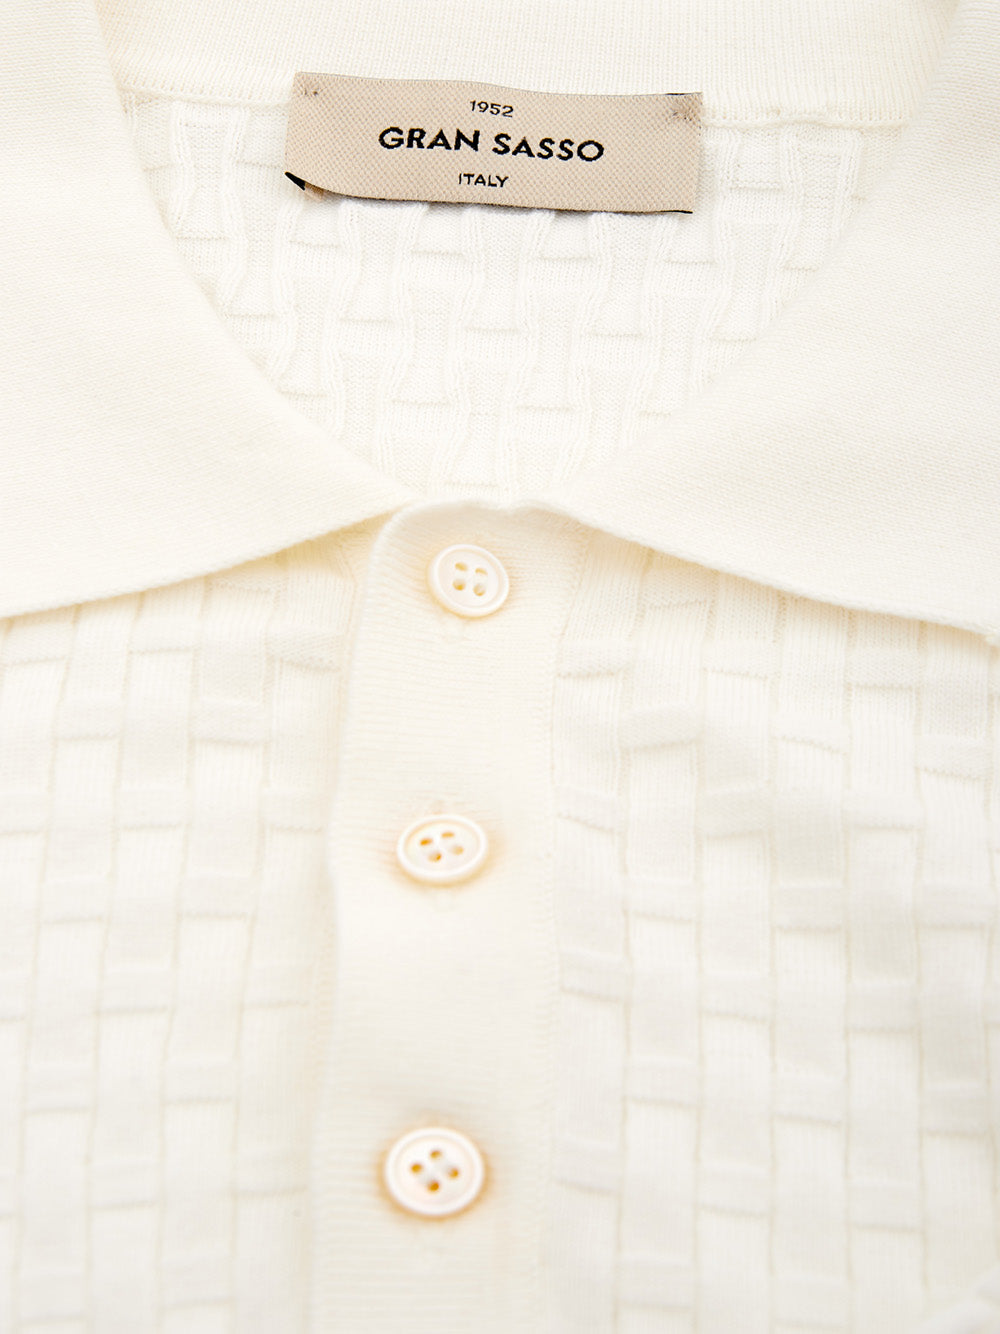 Cotton White Polo Shirt with Knitwear Effect